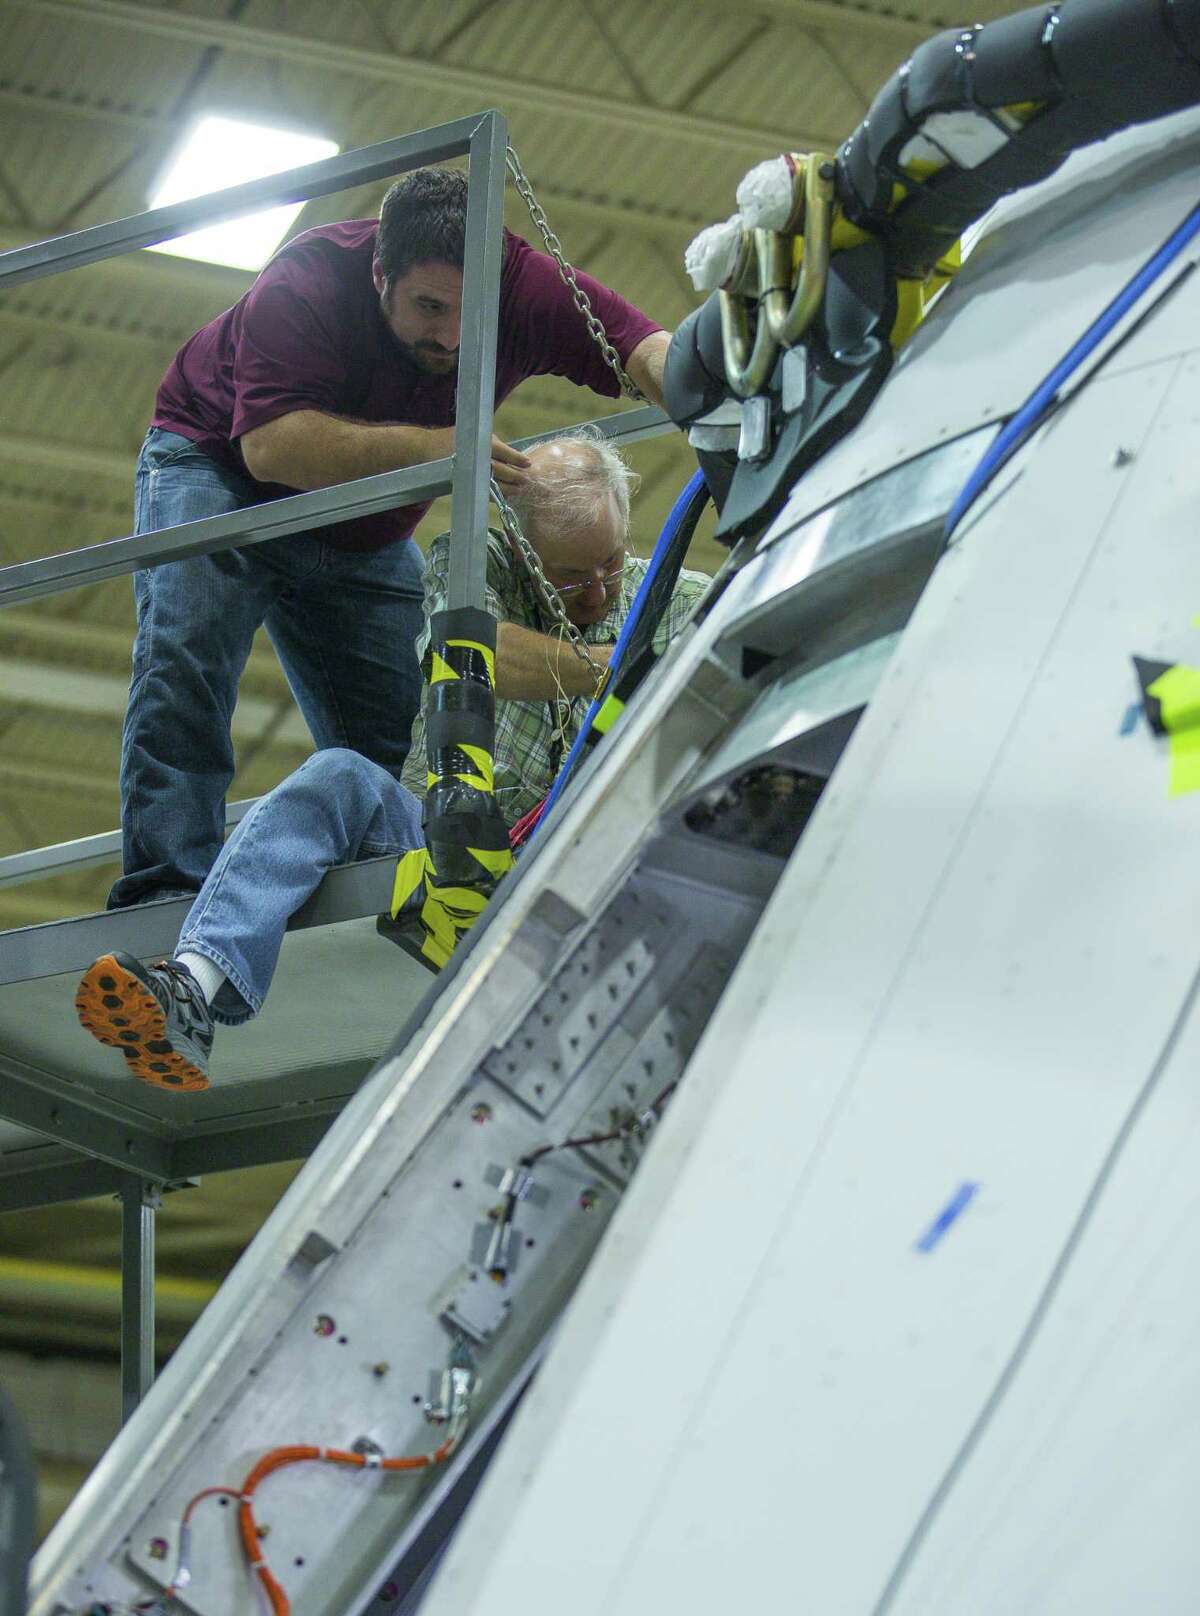 Engineers remove a data recorder that is part of testing of the capsule that will be used during Orion's Ascent Abort 2 test next year, at NASA's Johnson Space Center, Thursday, Sept. 13, 2018 in Houston. Engineers are currently testing systems that will fire during the capsules flight that will test the ability of the Orion capsule to abort if something goes wrong during launch.